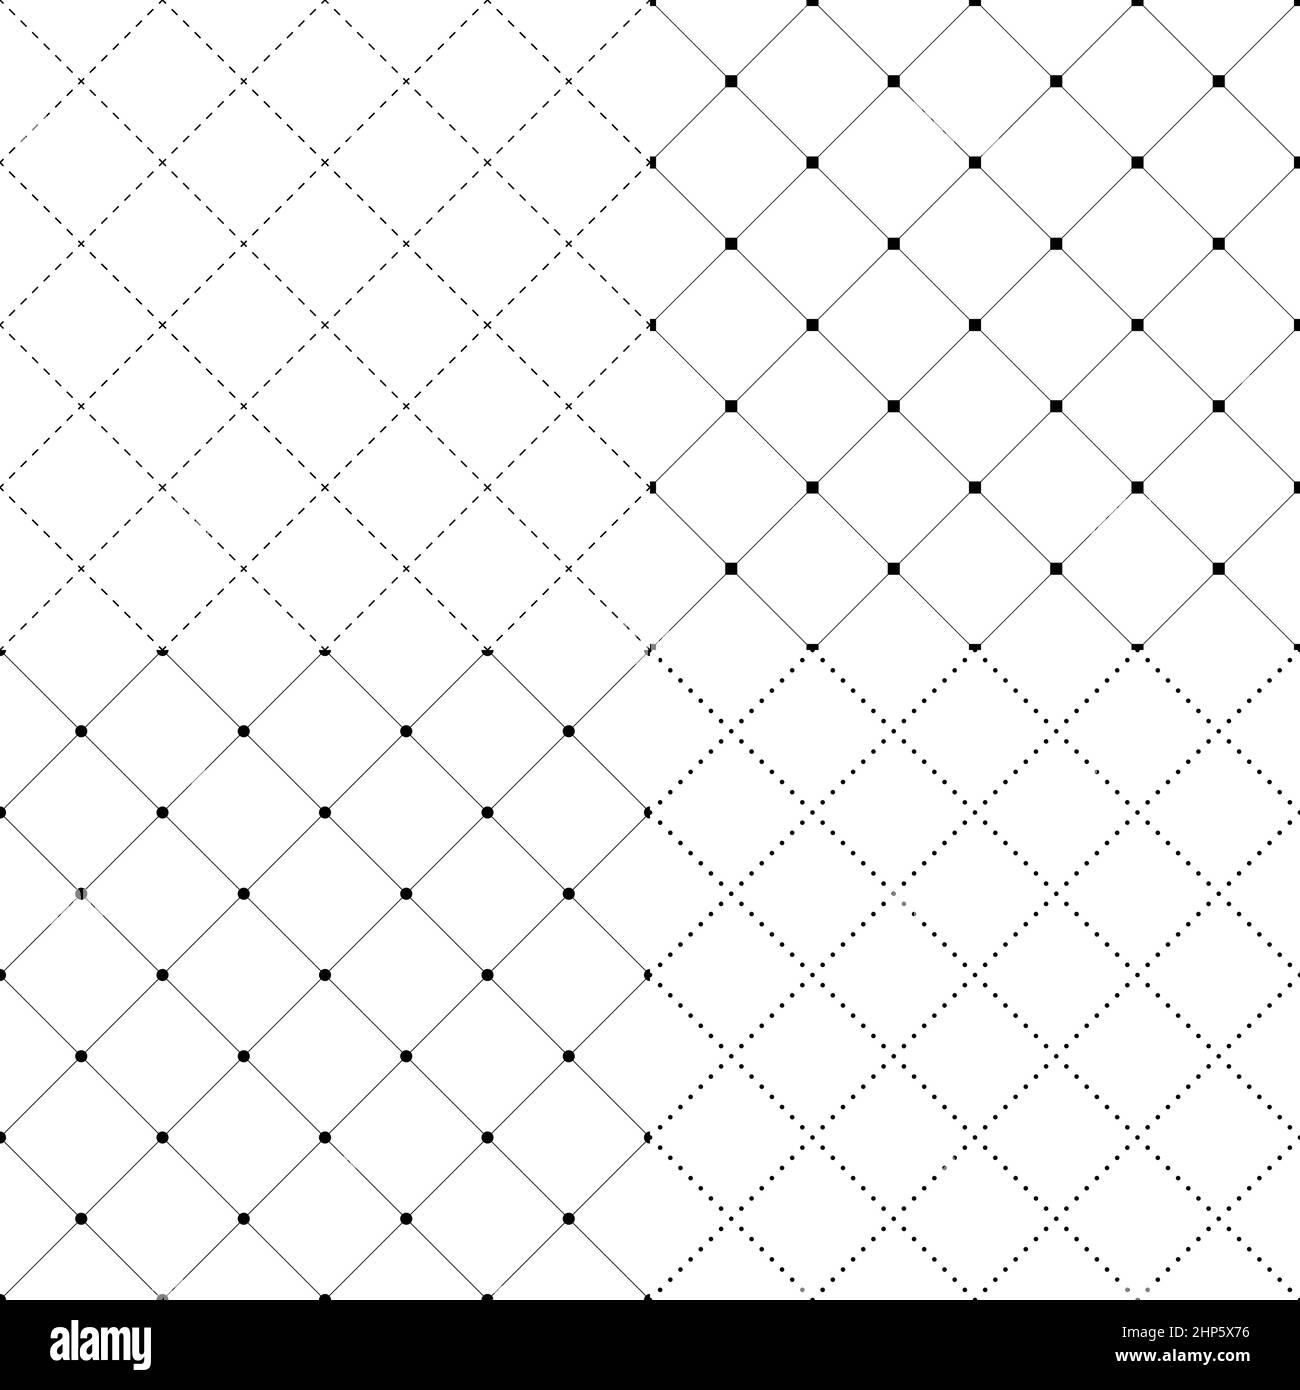 geometric seamless patterns set, black and white vector backgrounds collection. Stock Vector